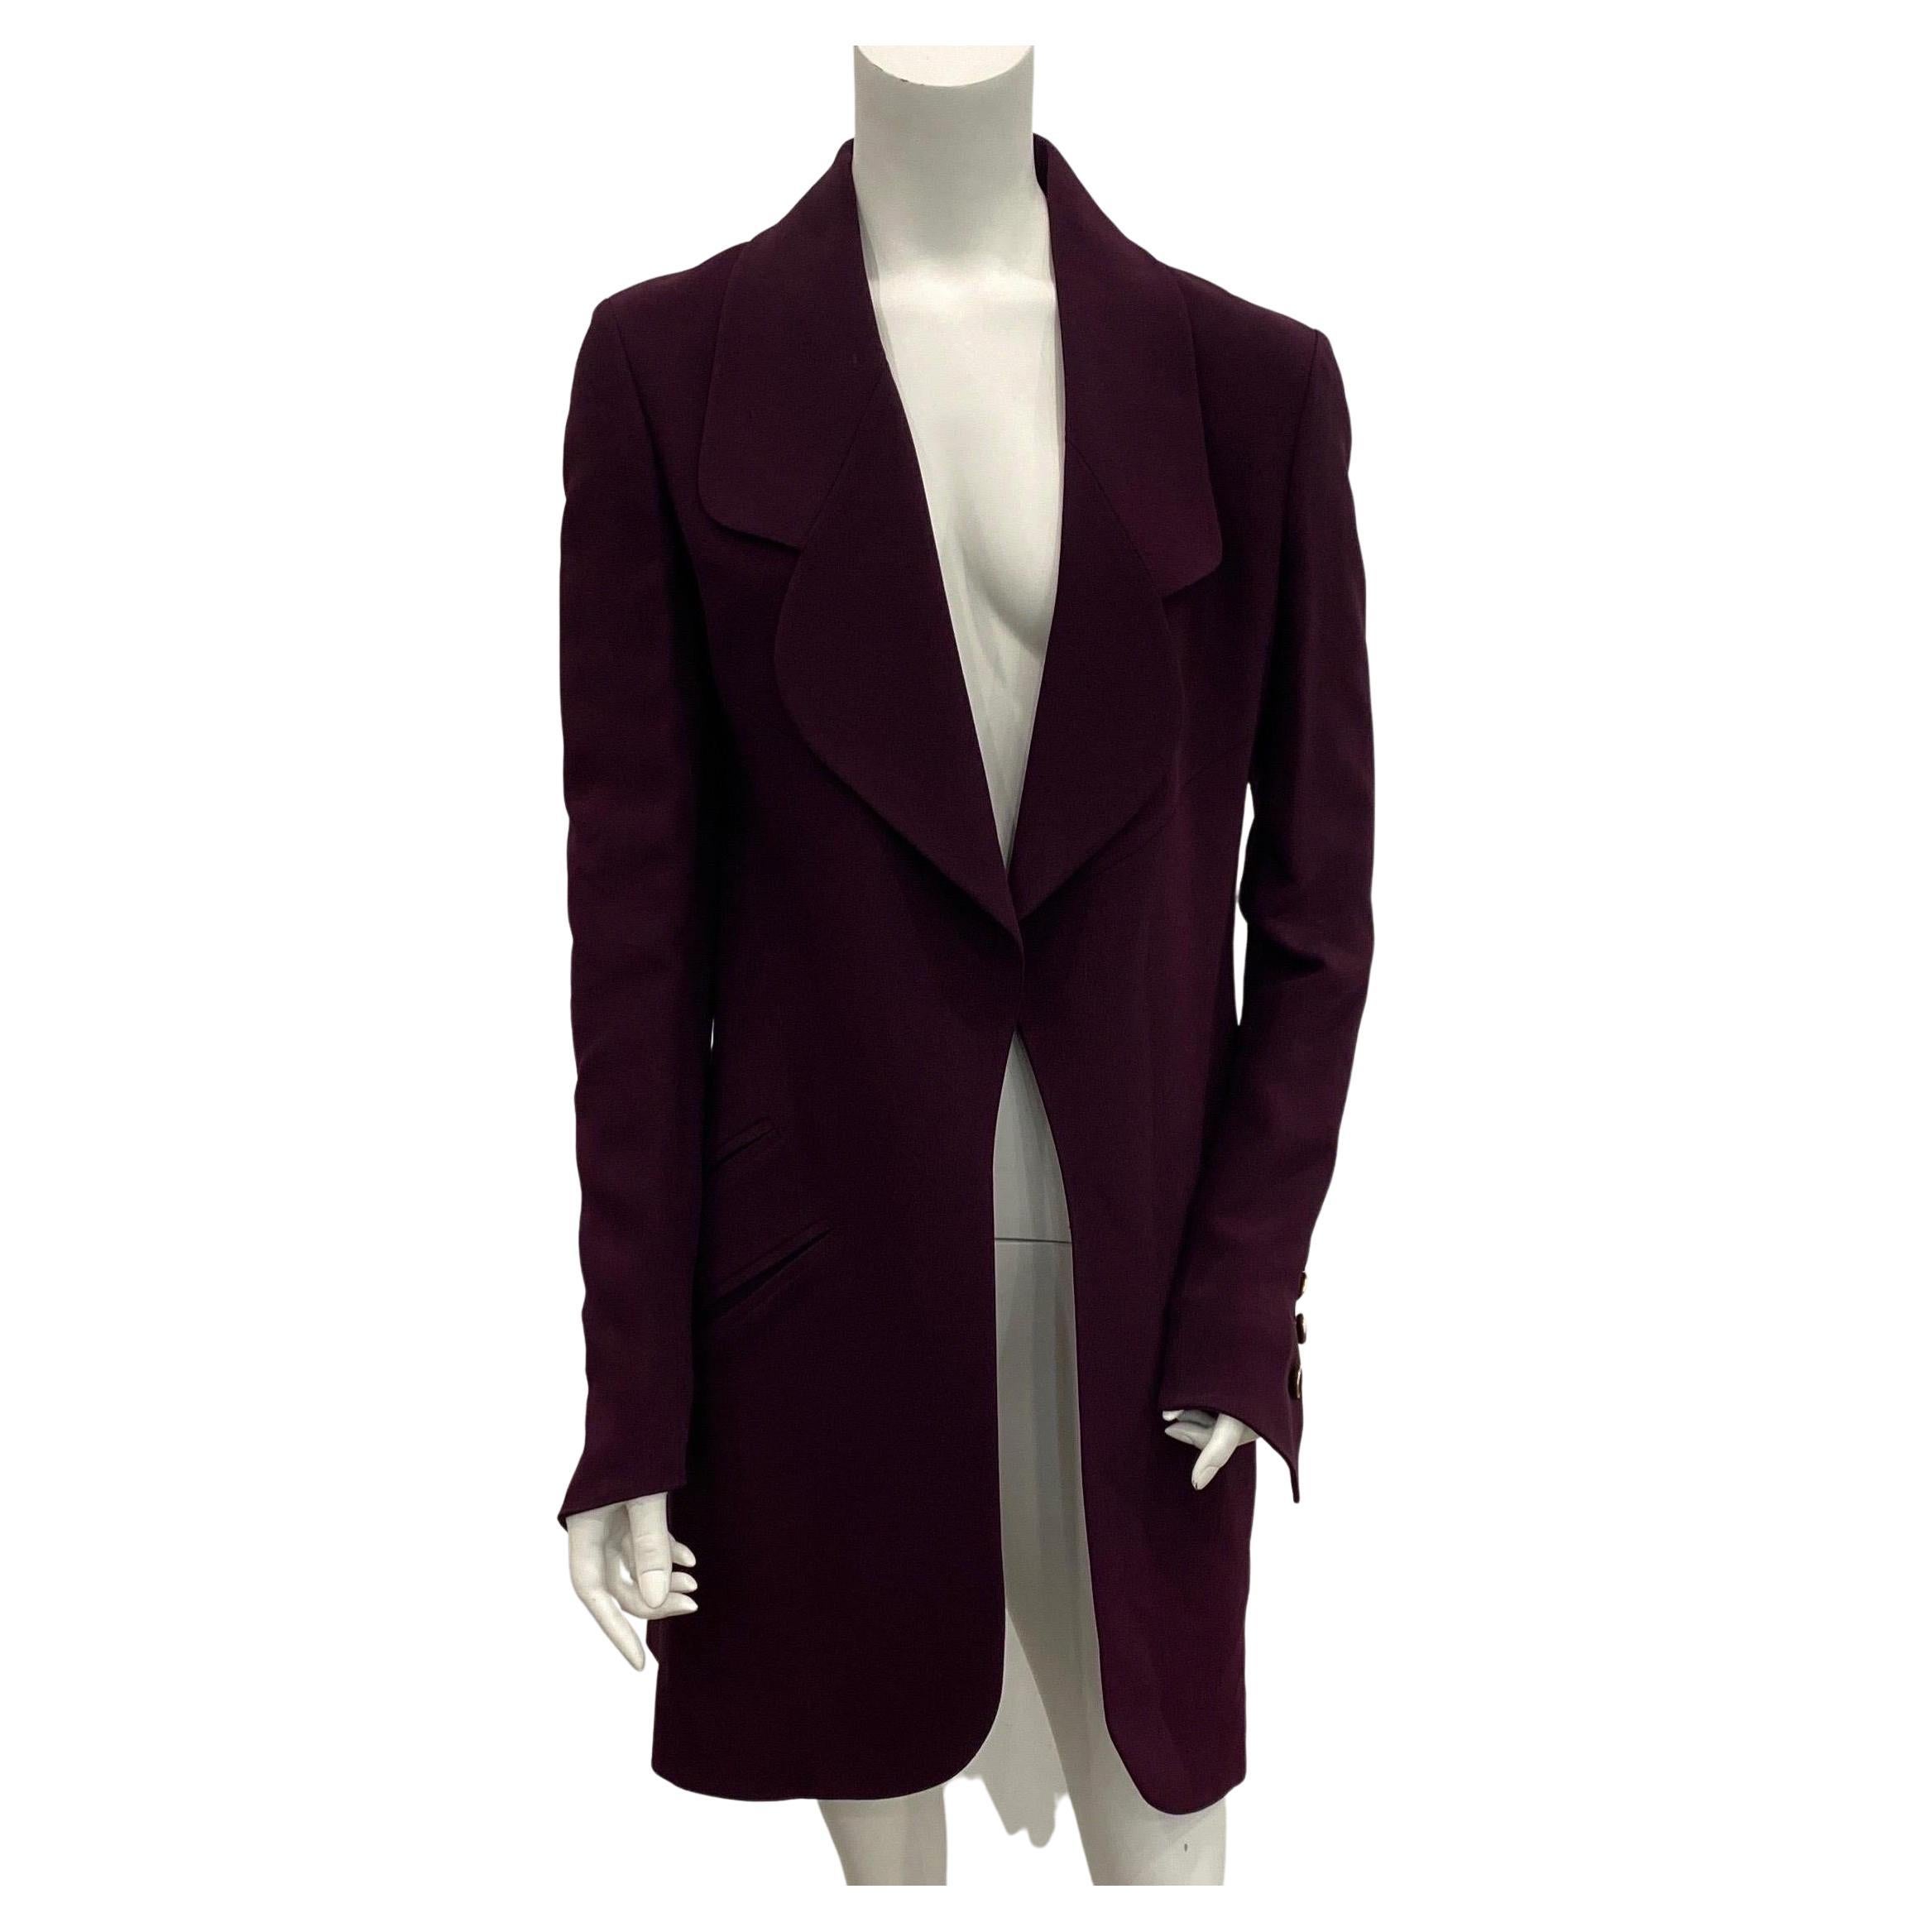 Karl Lagerfeld Eggplant 3/4 Coat - Size 36 For Sale